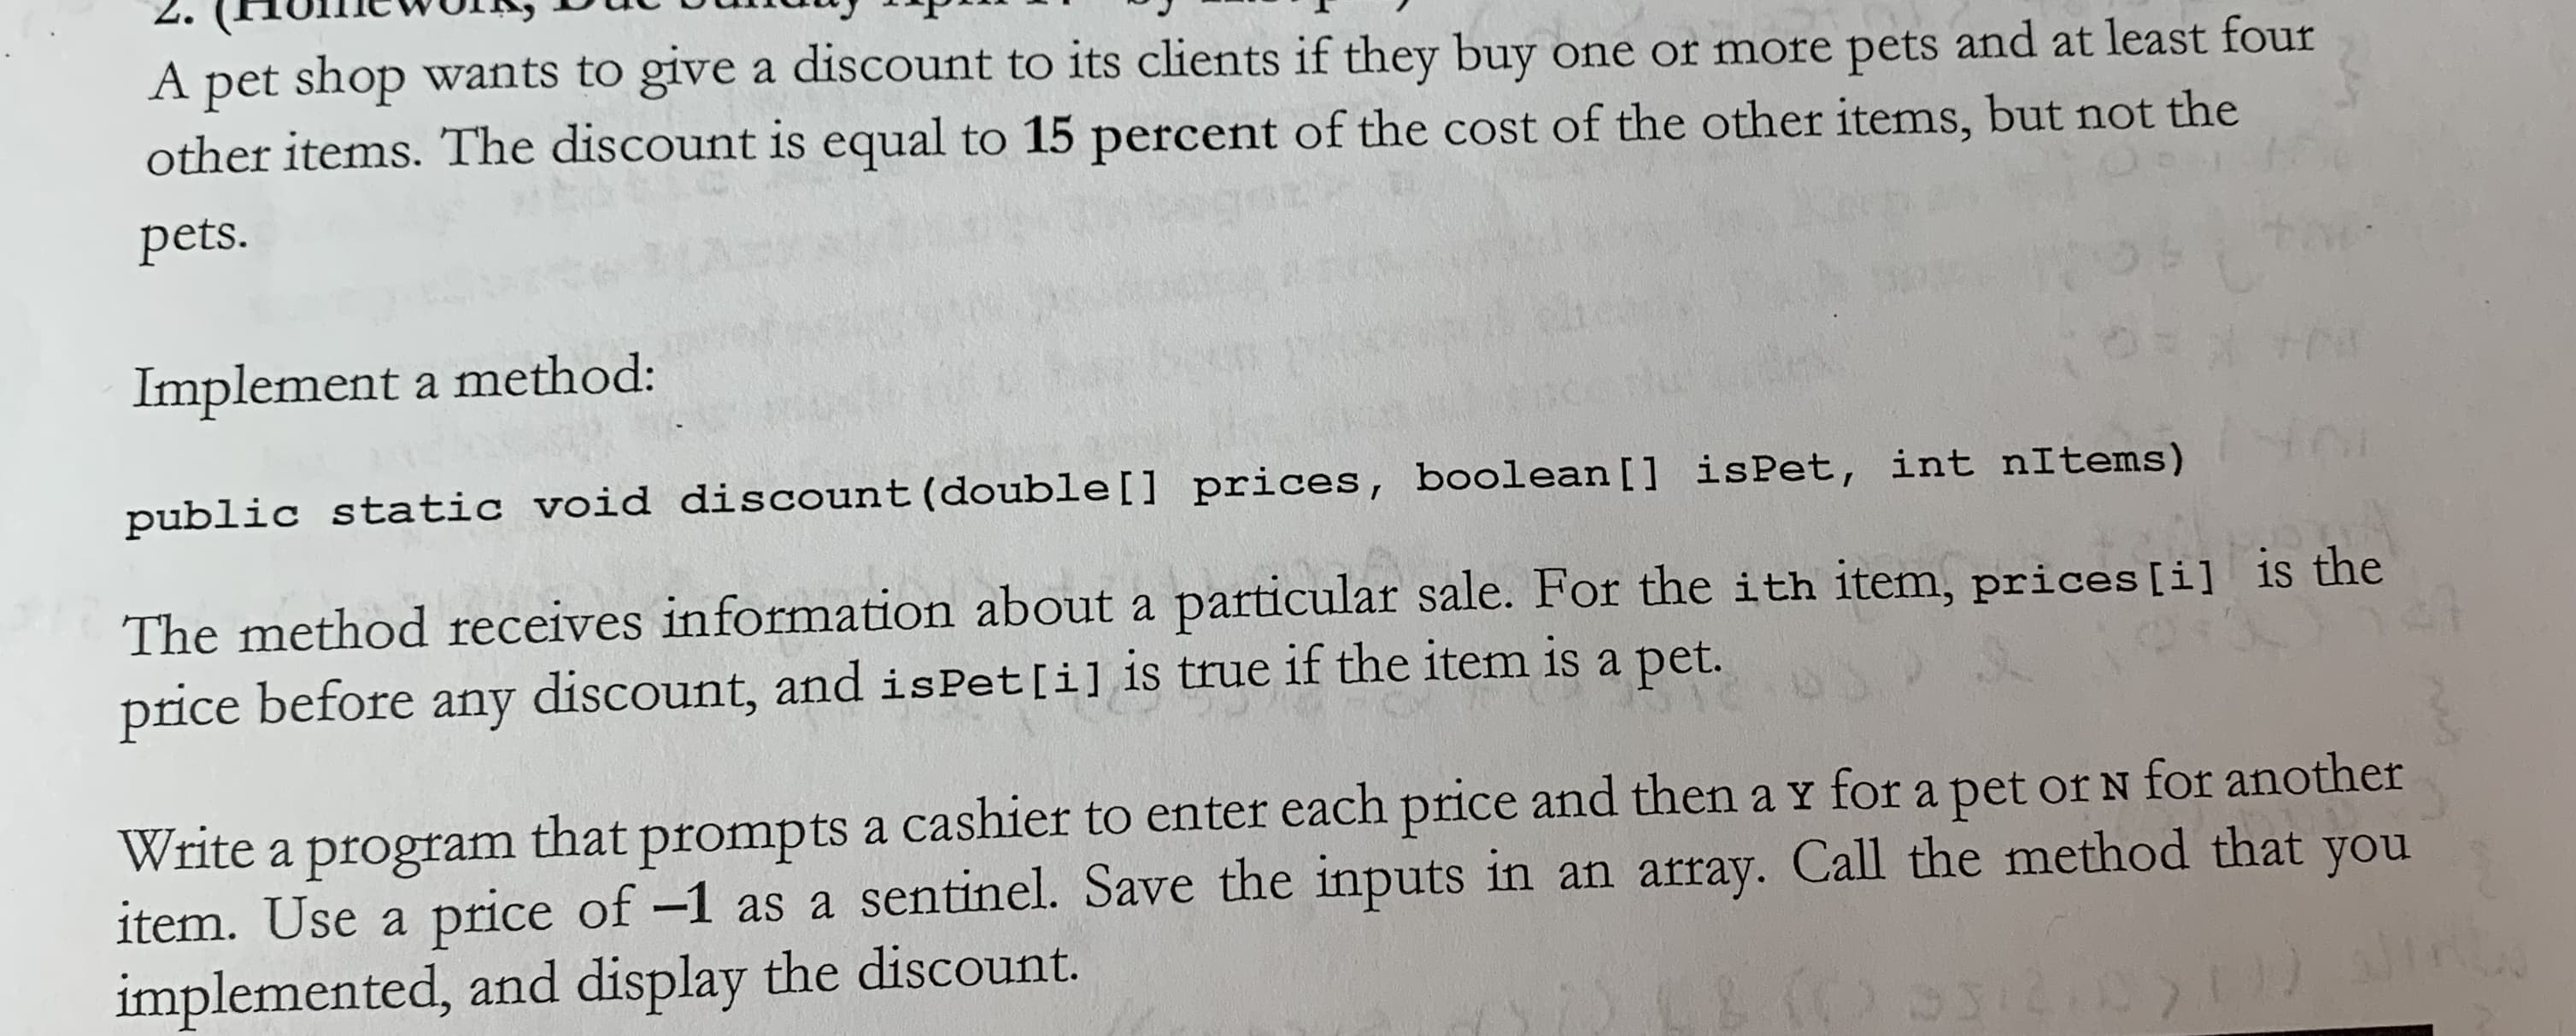 A pet shop wants to give a discount to its clients if they buy one or more pets and at least four
other items. The discount is equ
pets.
al to 15 percent of the cost of the other items, but not the
Implement a method:
public static void discount (double[]
prices,
boolean[]
İsPet,
int nitens)
The method receives information about a particular sale. For the i th item, prices ti)
price before any discount, and isPet [i] Is true if the iten 1s a pet.
is the
Write a program that prompts a cashier to enter each price and then a y for a pet or N for another
item. Use a price of -1 as a sentinel. Save the inputs in an array. Call the method that you
implemented, and display the discount.
